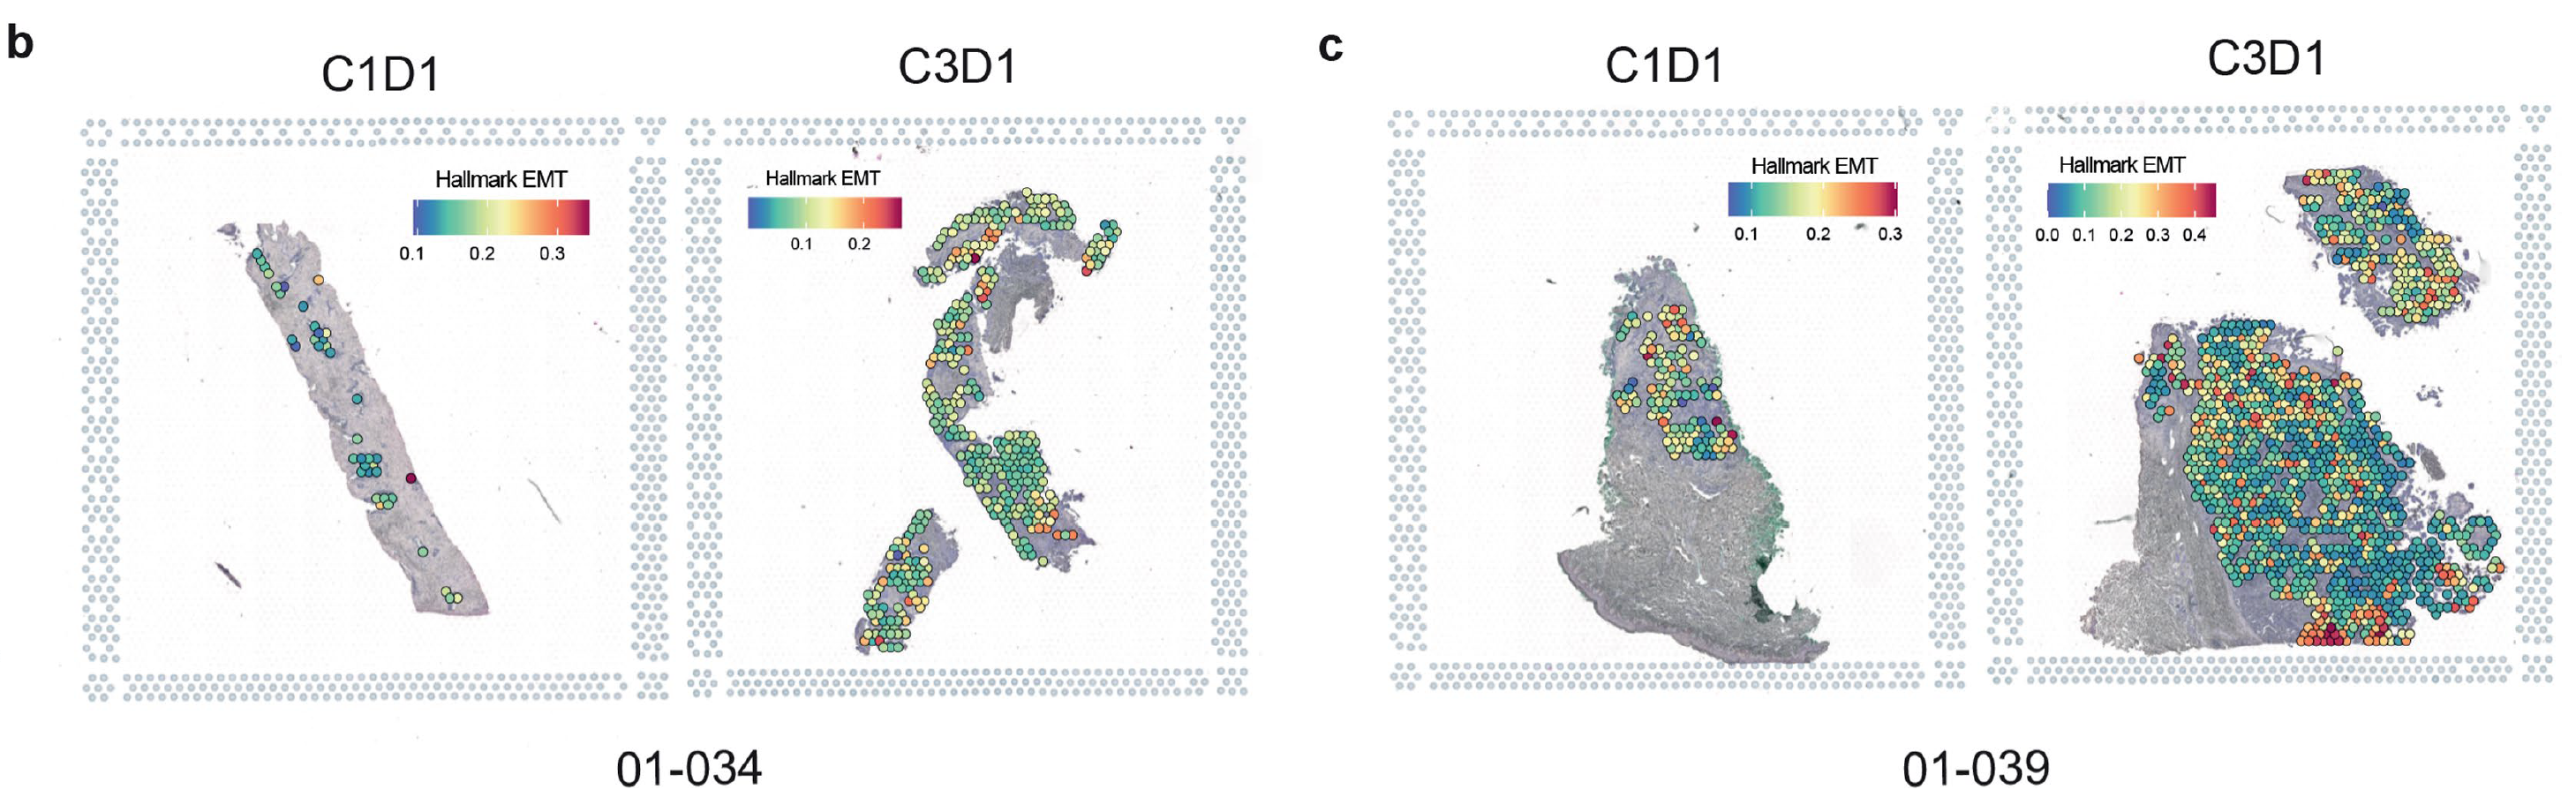 Extended Data Figure 3b,c from Cassier et al. showing Visium Spatial data on paired pre- and post-treatment samples from two patients (01-034 and 01-039). EMT score enrichment is indicated on Visium tumoral spots. Credit: Cassier P, et al. Nature 620: 409–416 (2023). doi: 10.1038/s41586-023-06367-z (CC BY 4.0).